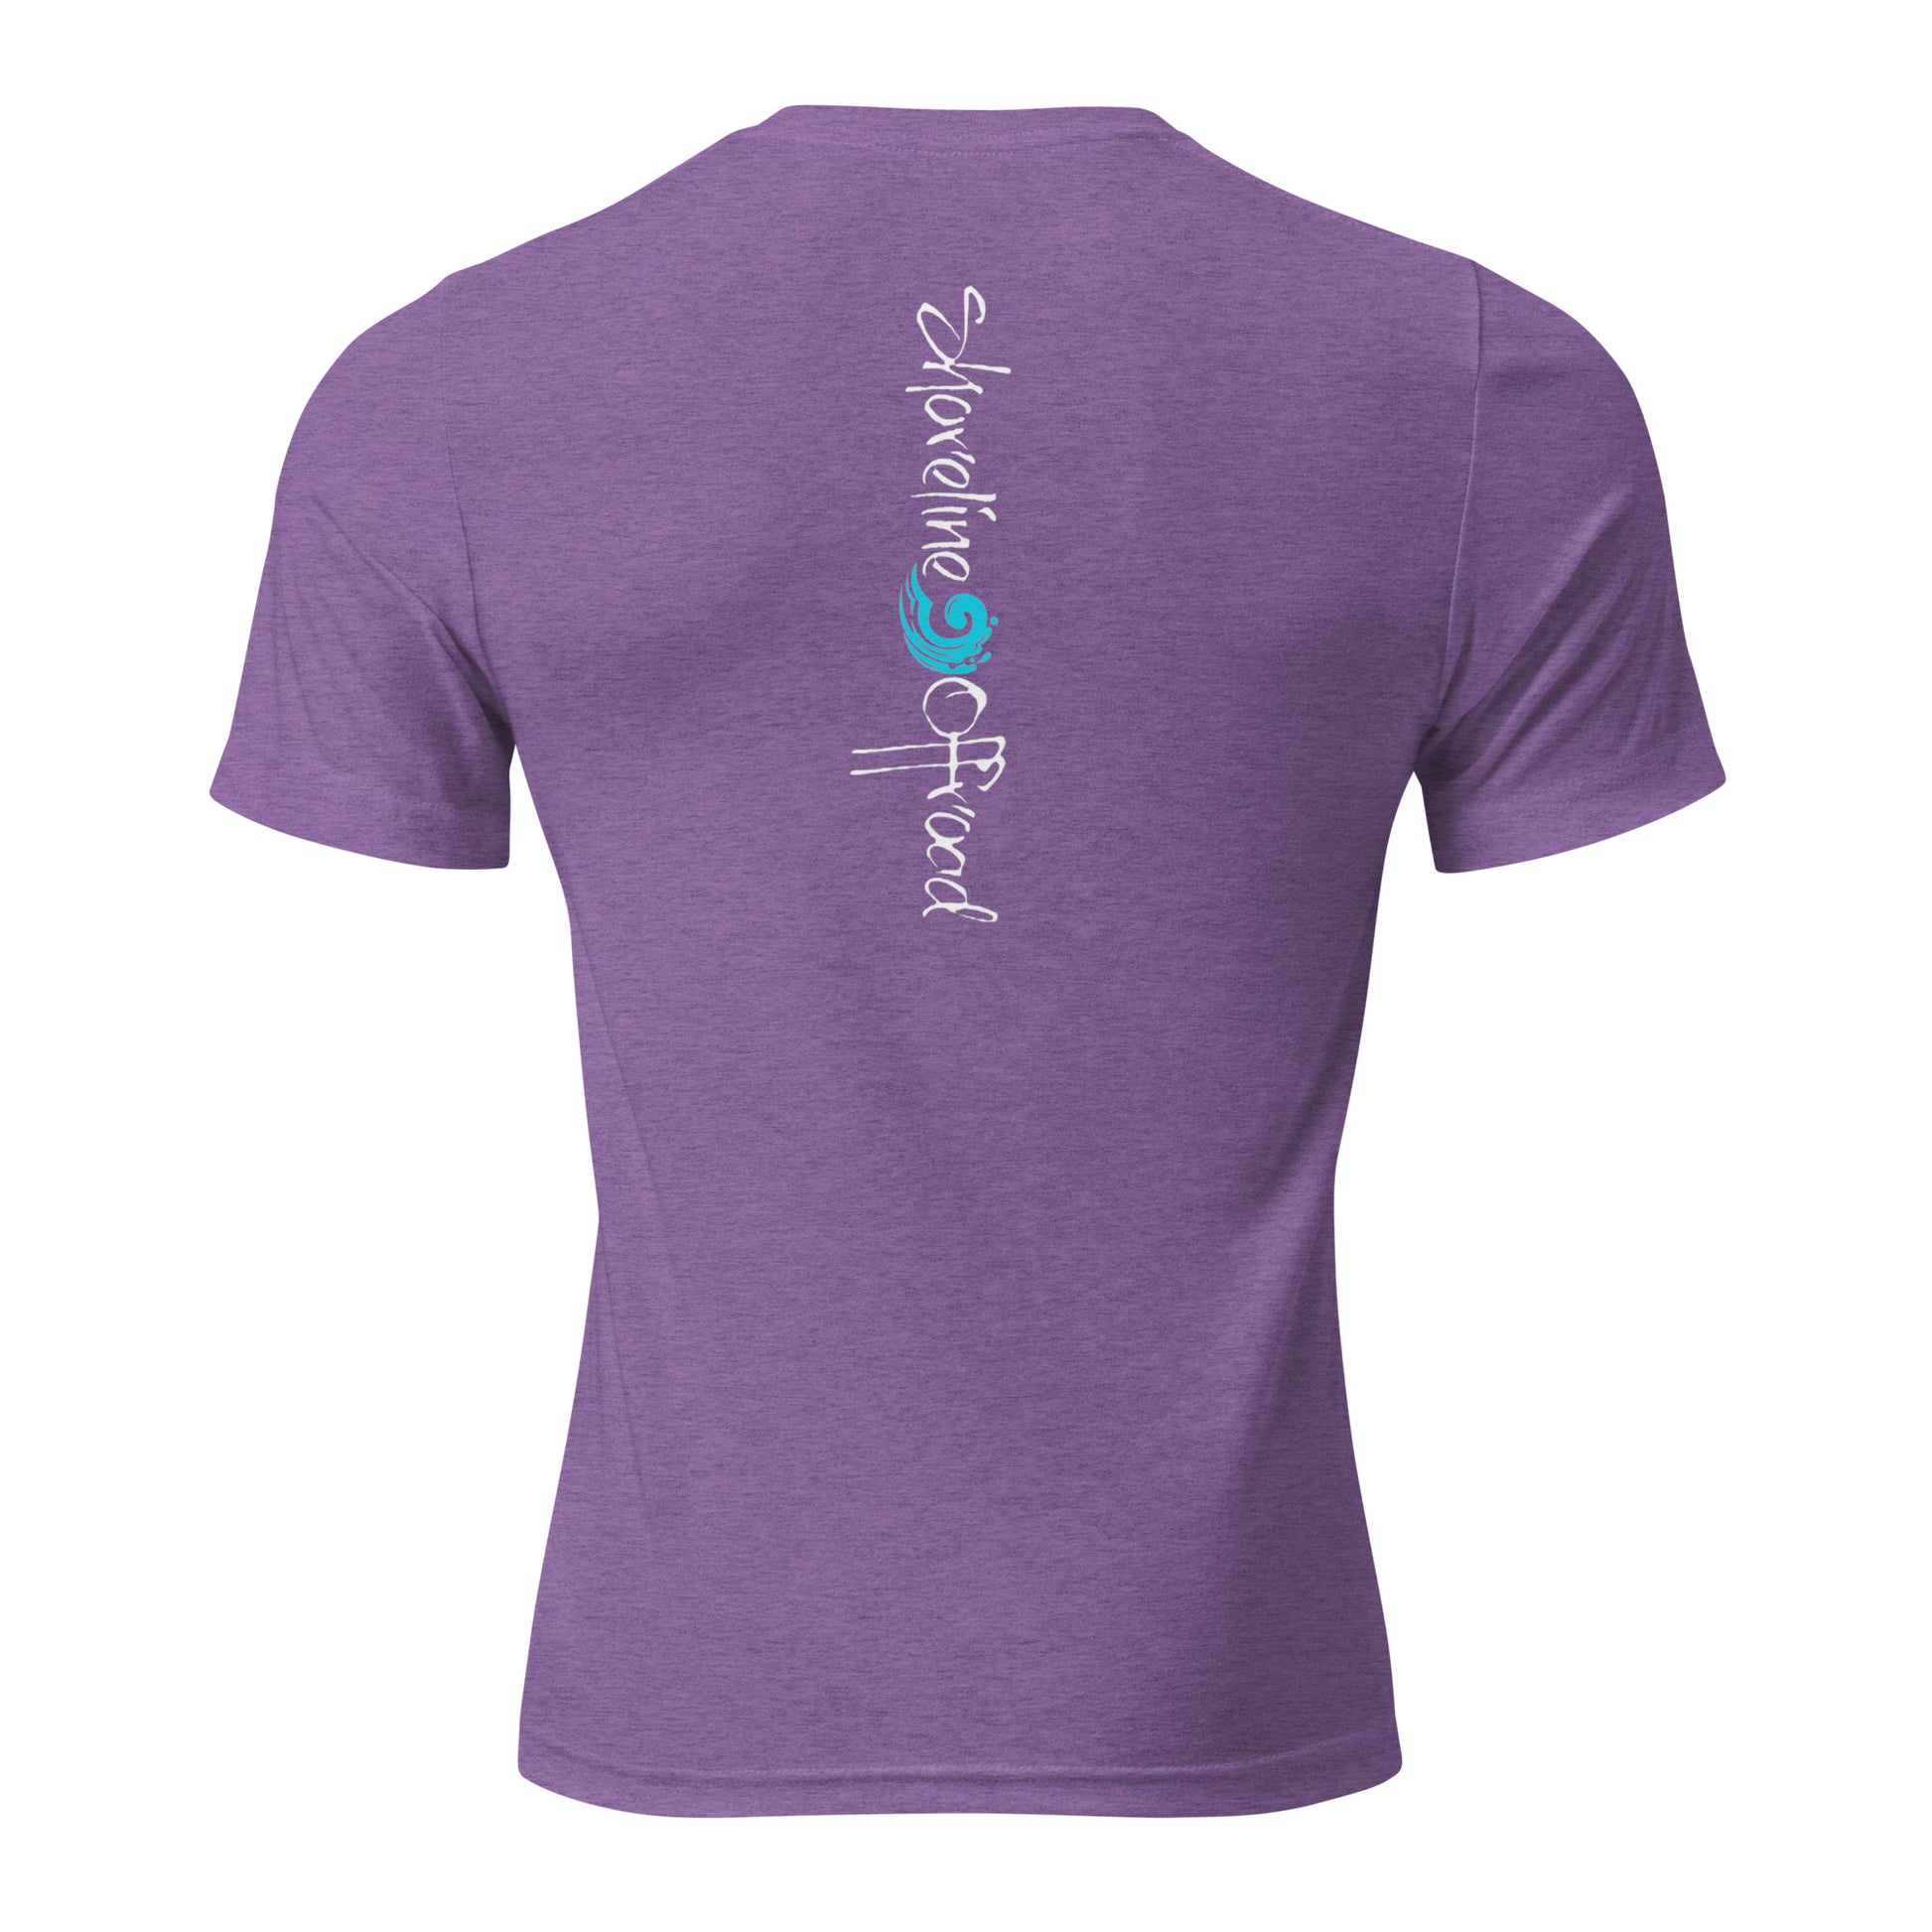 the back of a purple shirt with a blue and green logo on it